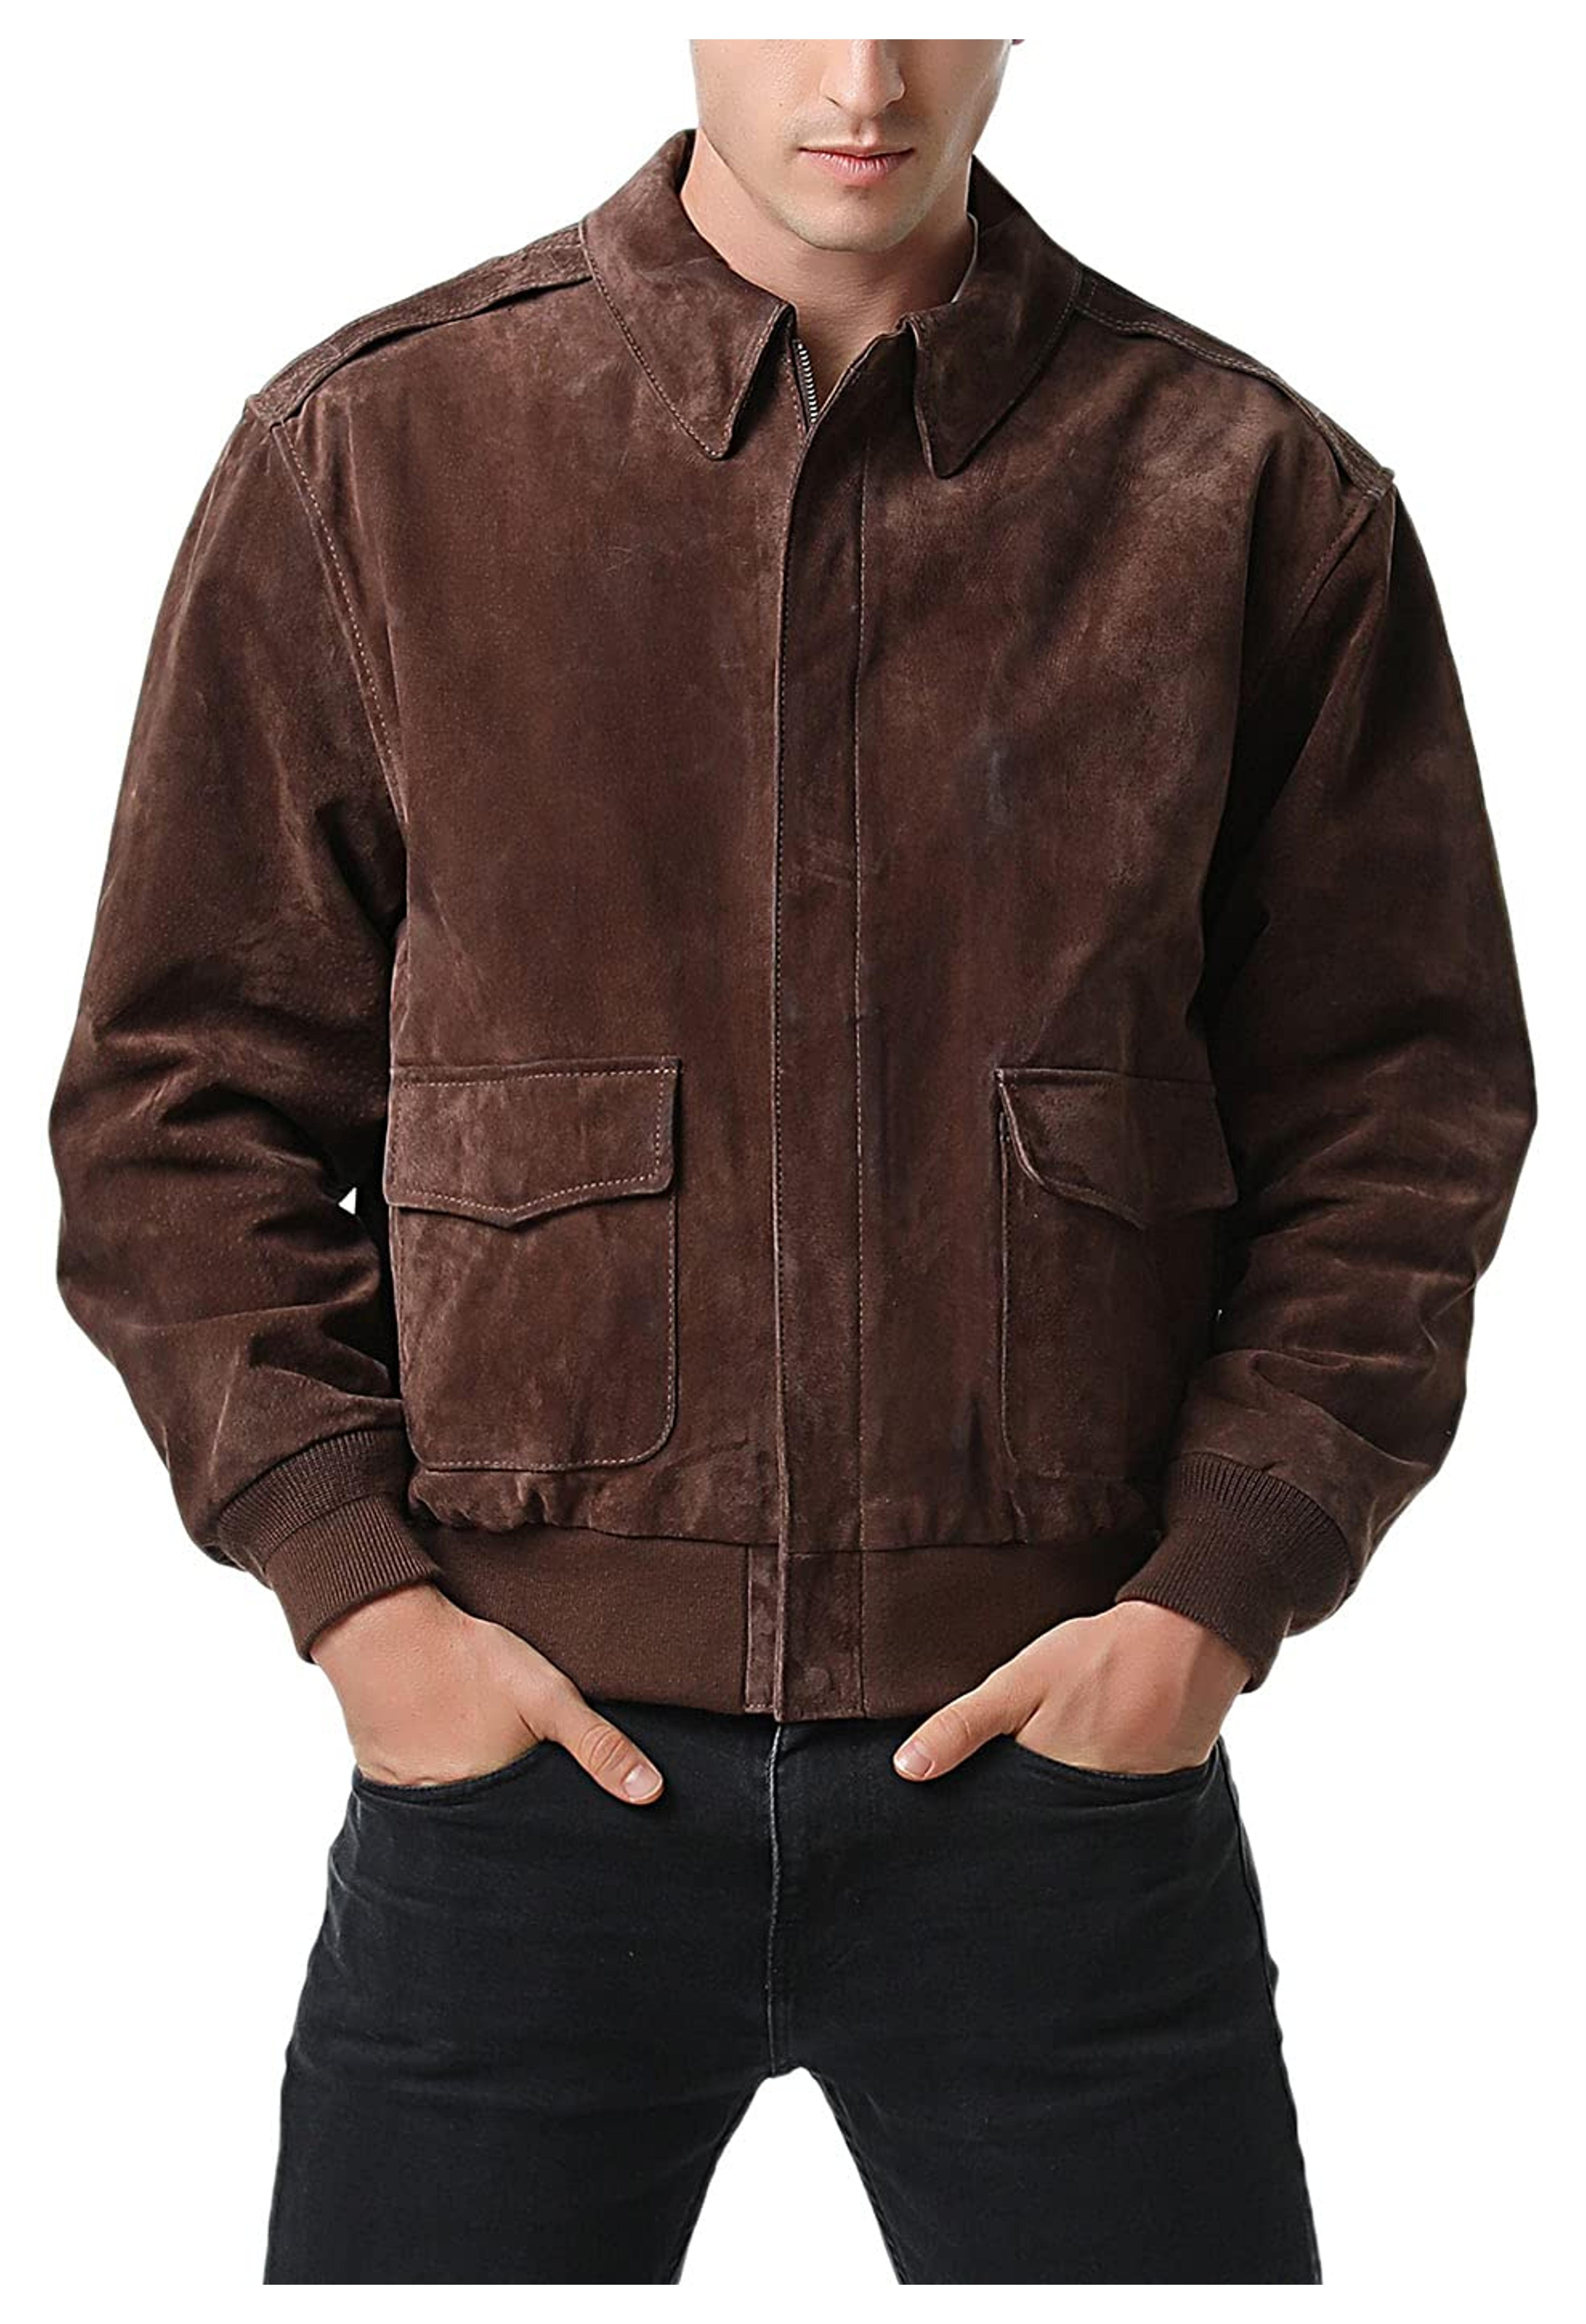 Landing Leathers Men Air Force A-2 Suede Leather Flight Bomber Jacket (Regular and Big & Tall) at Amazon Men’s Clothing store